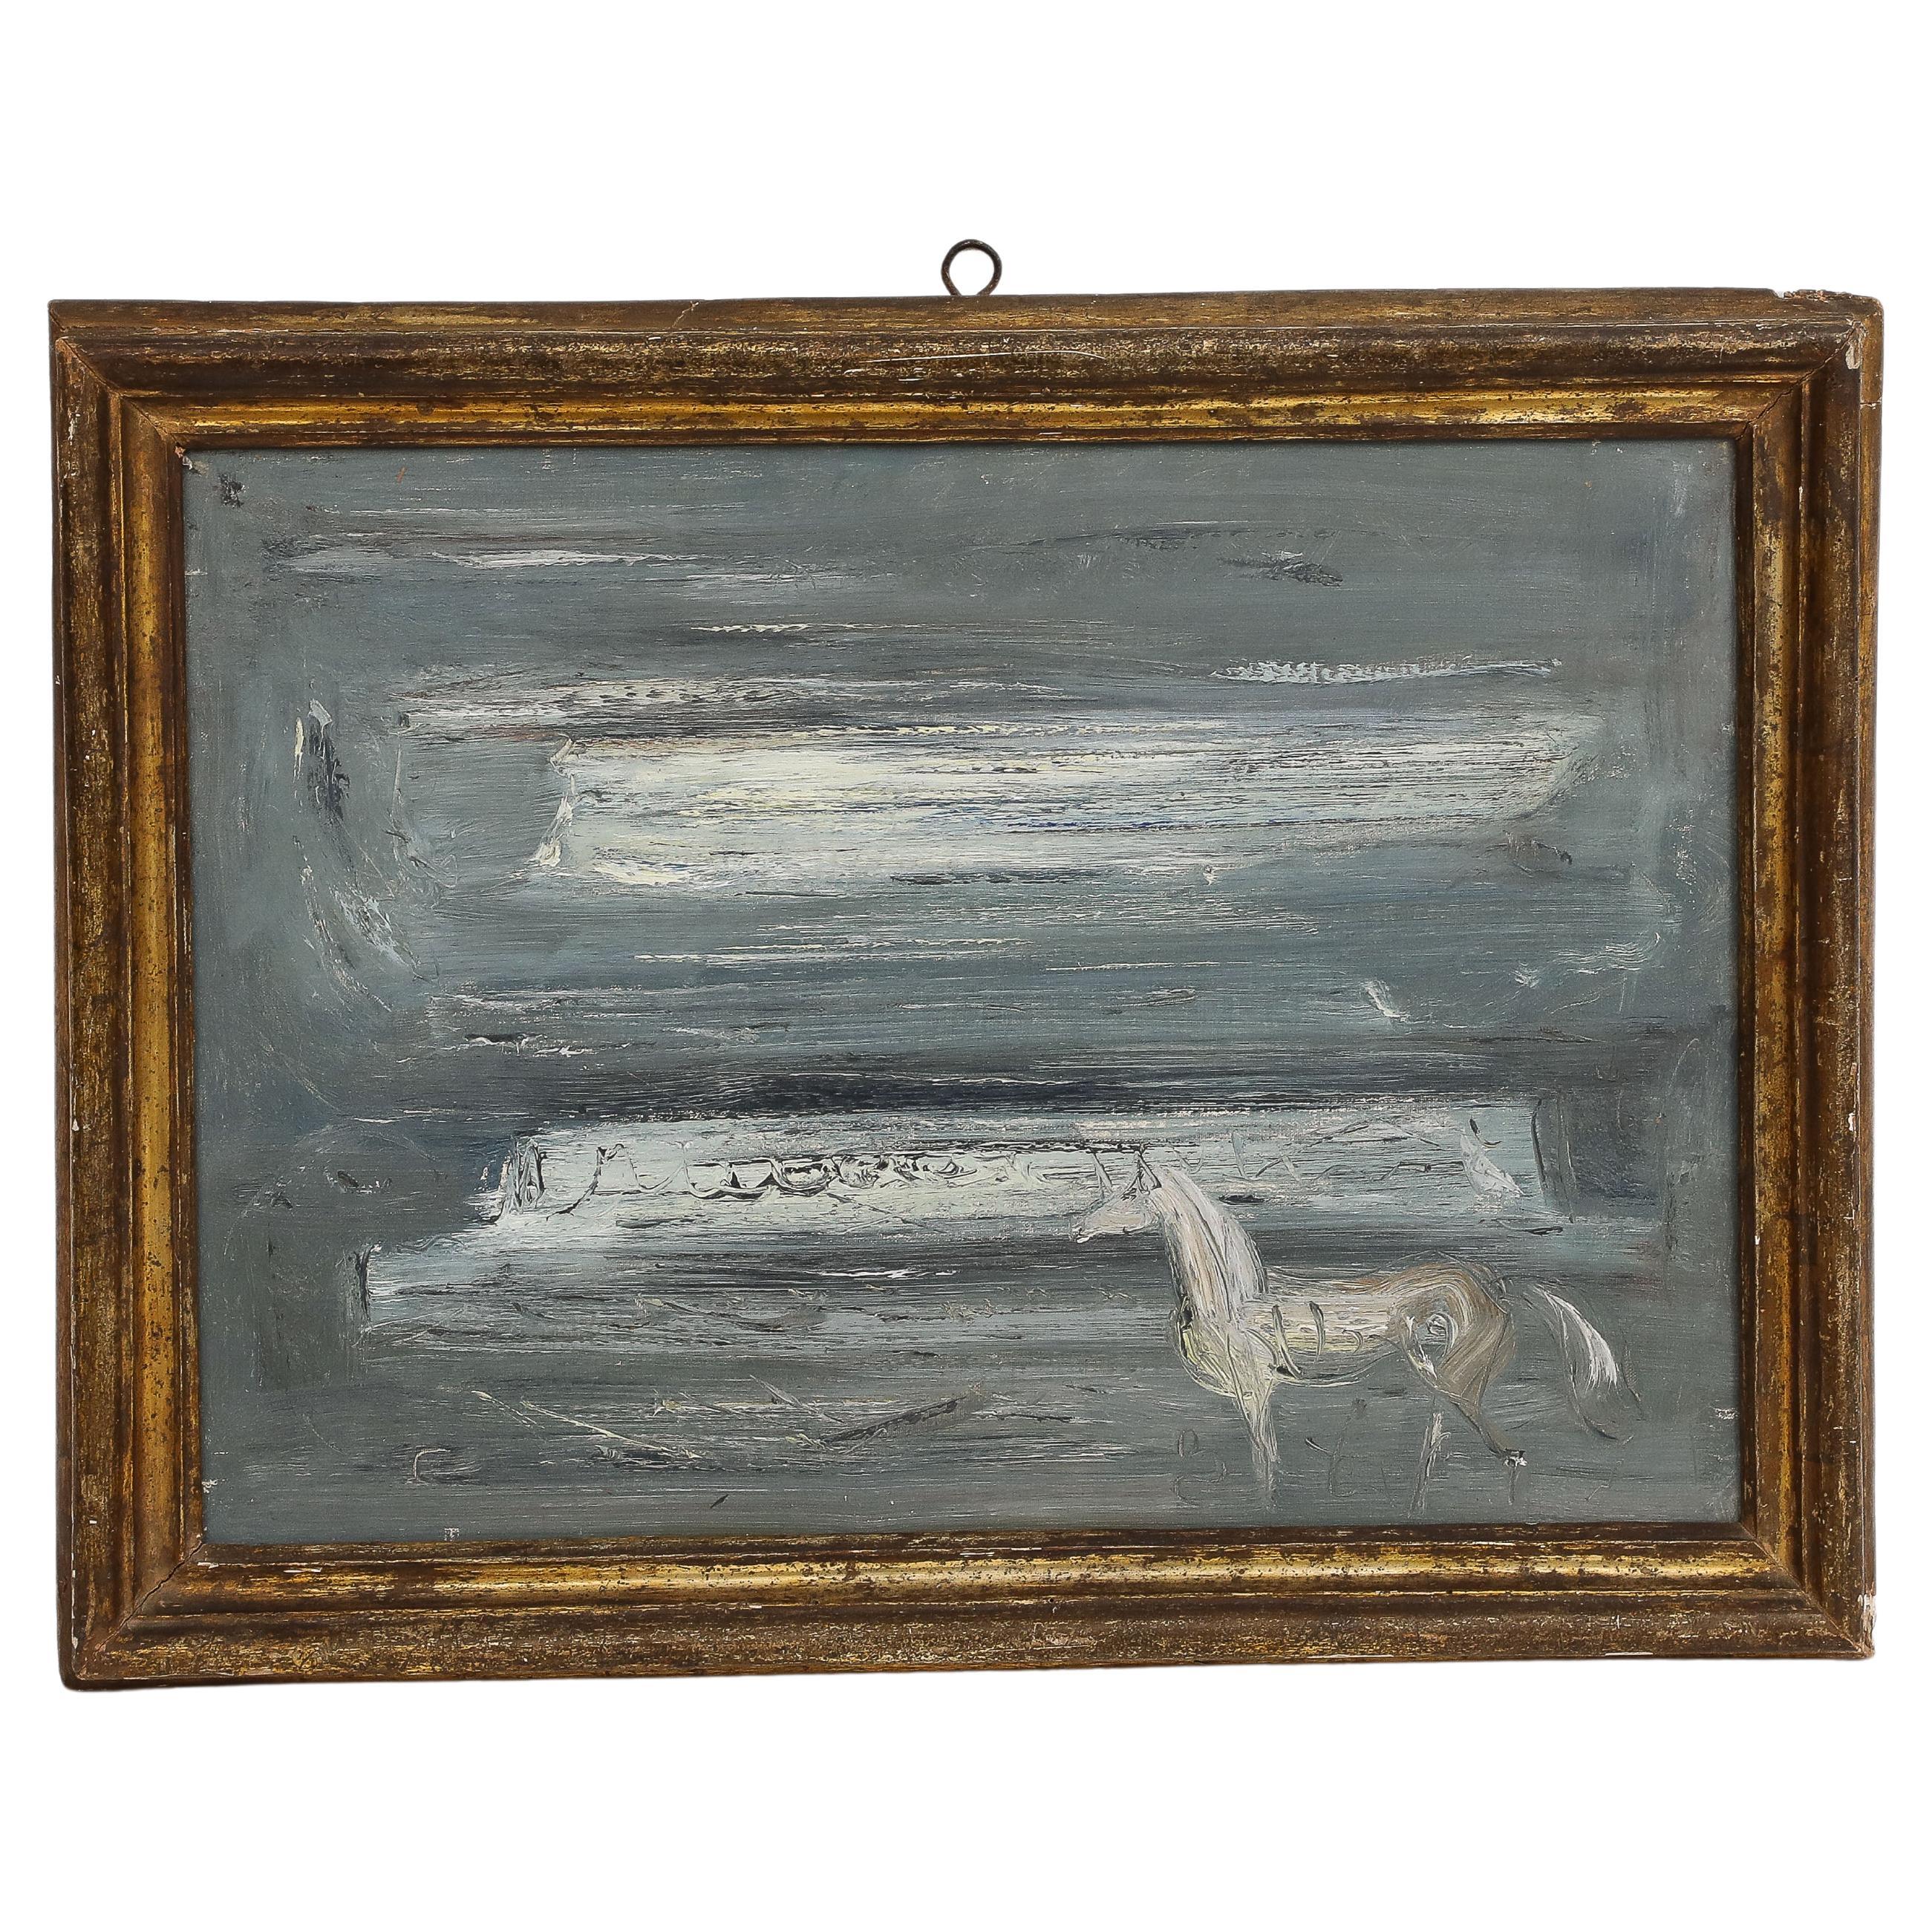 Framed Giovanni Stradone Expressionist Painting, "Notturno Antico", signed 1950s For Sale